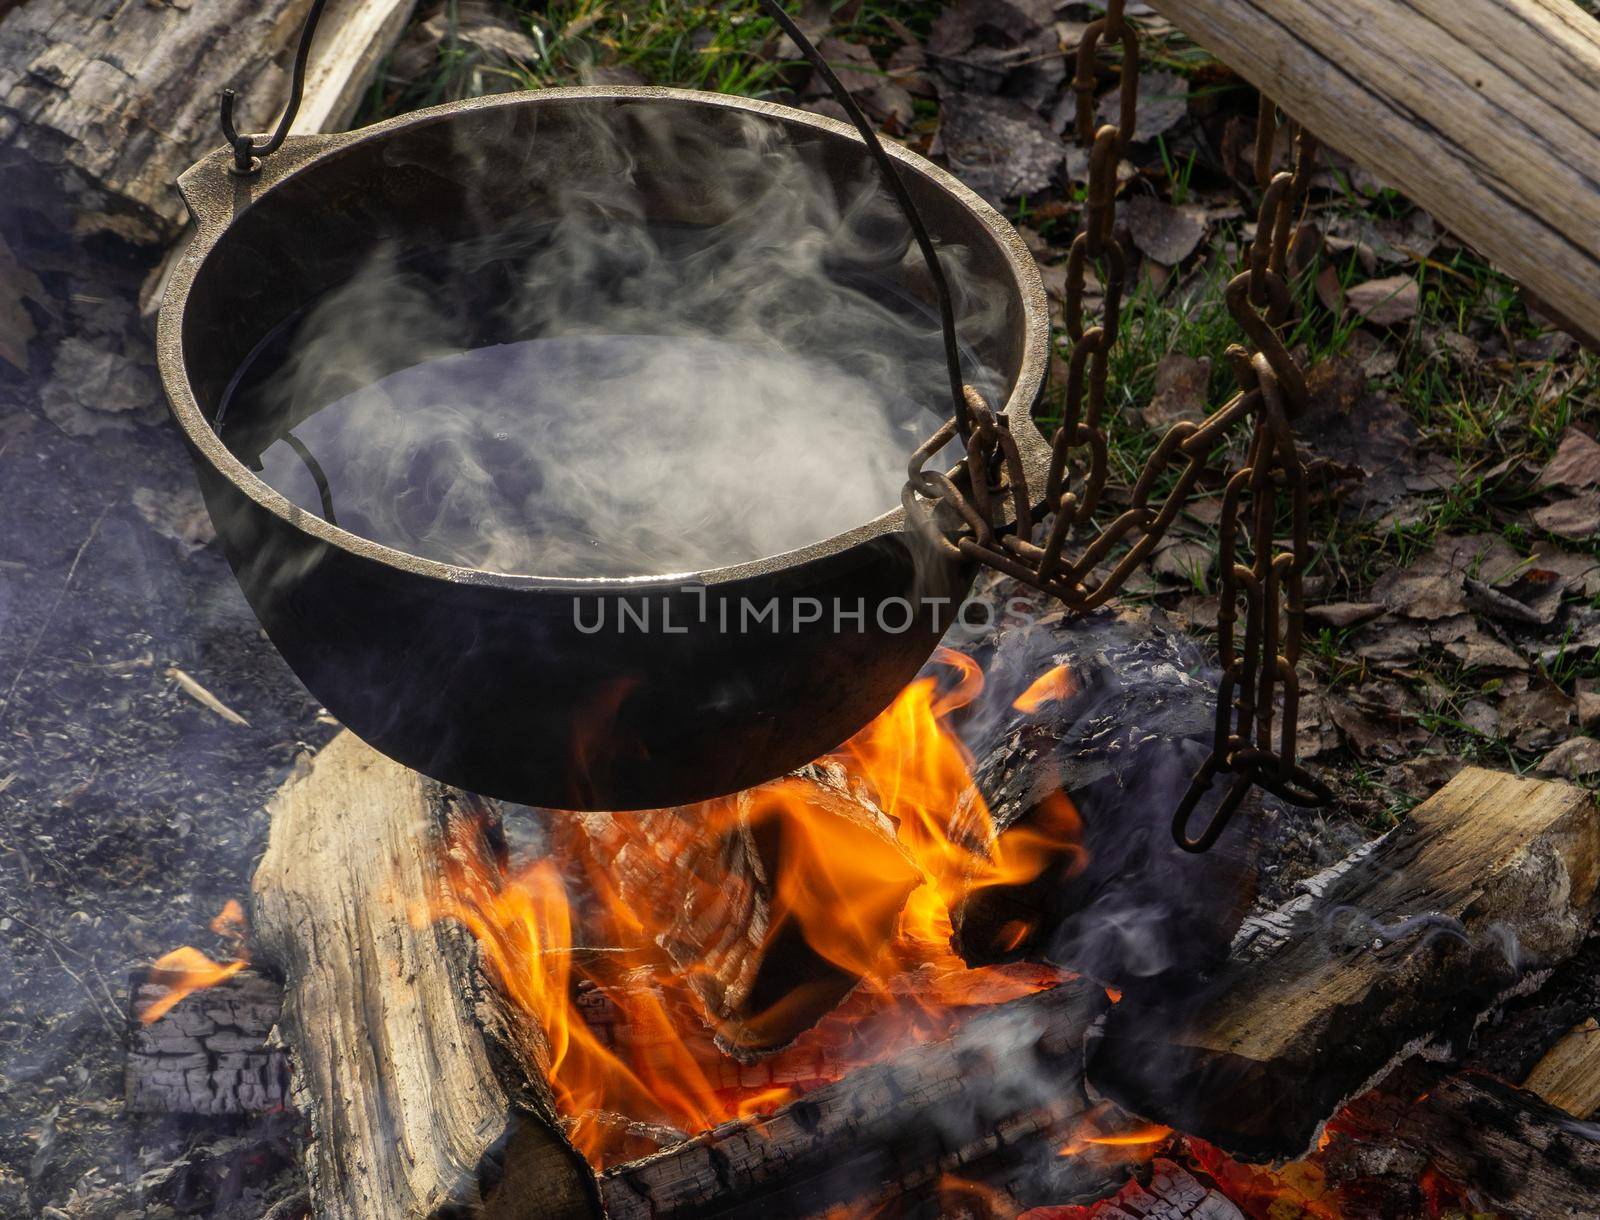 Pot On The Fire. Water boils in a cauldron over a fire.